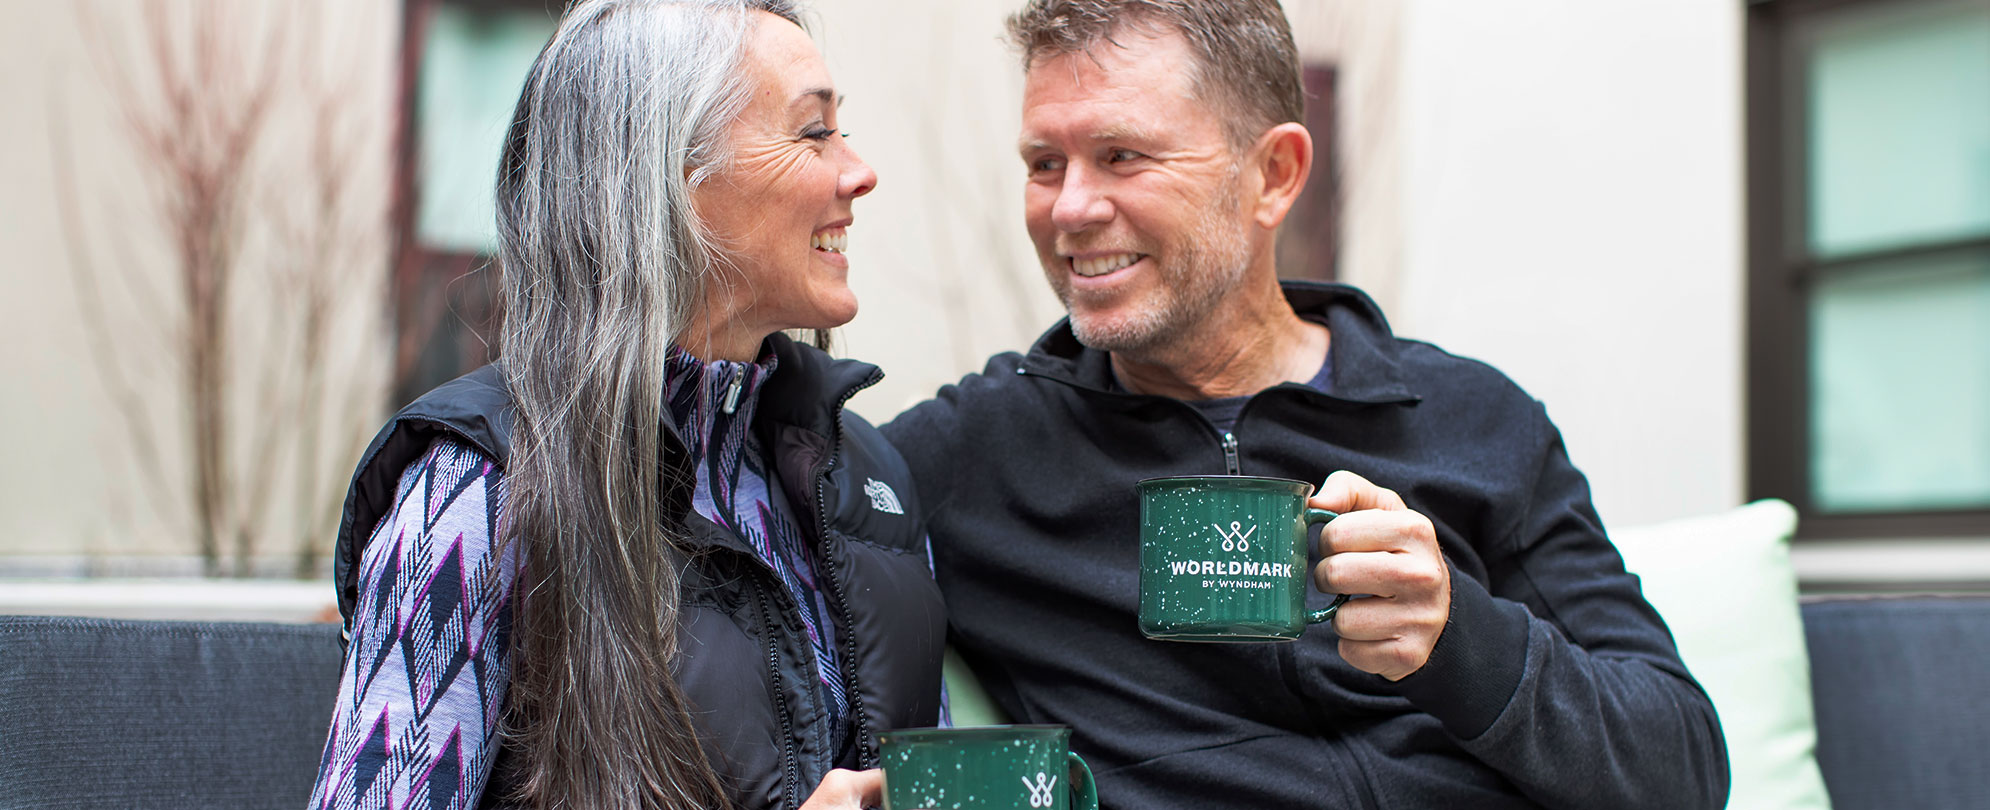 Older man and woman smiling at each other holding coffee mugs with the WorldMark by Wyndham logo.